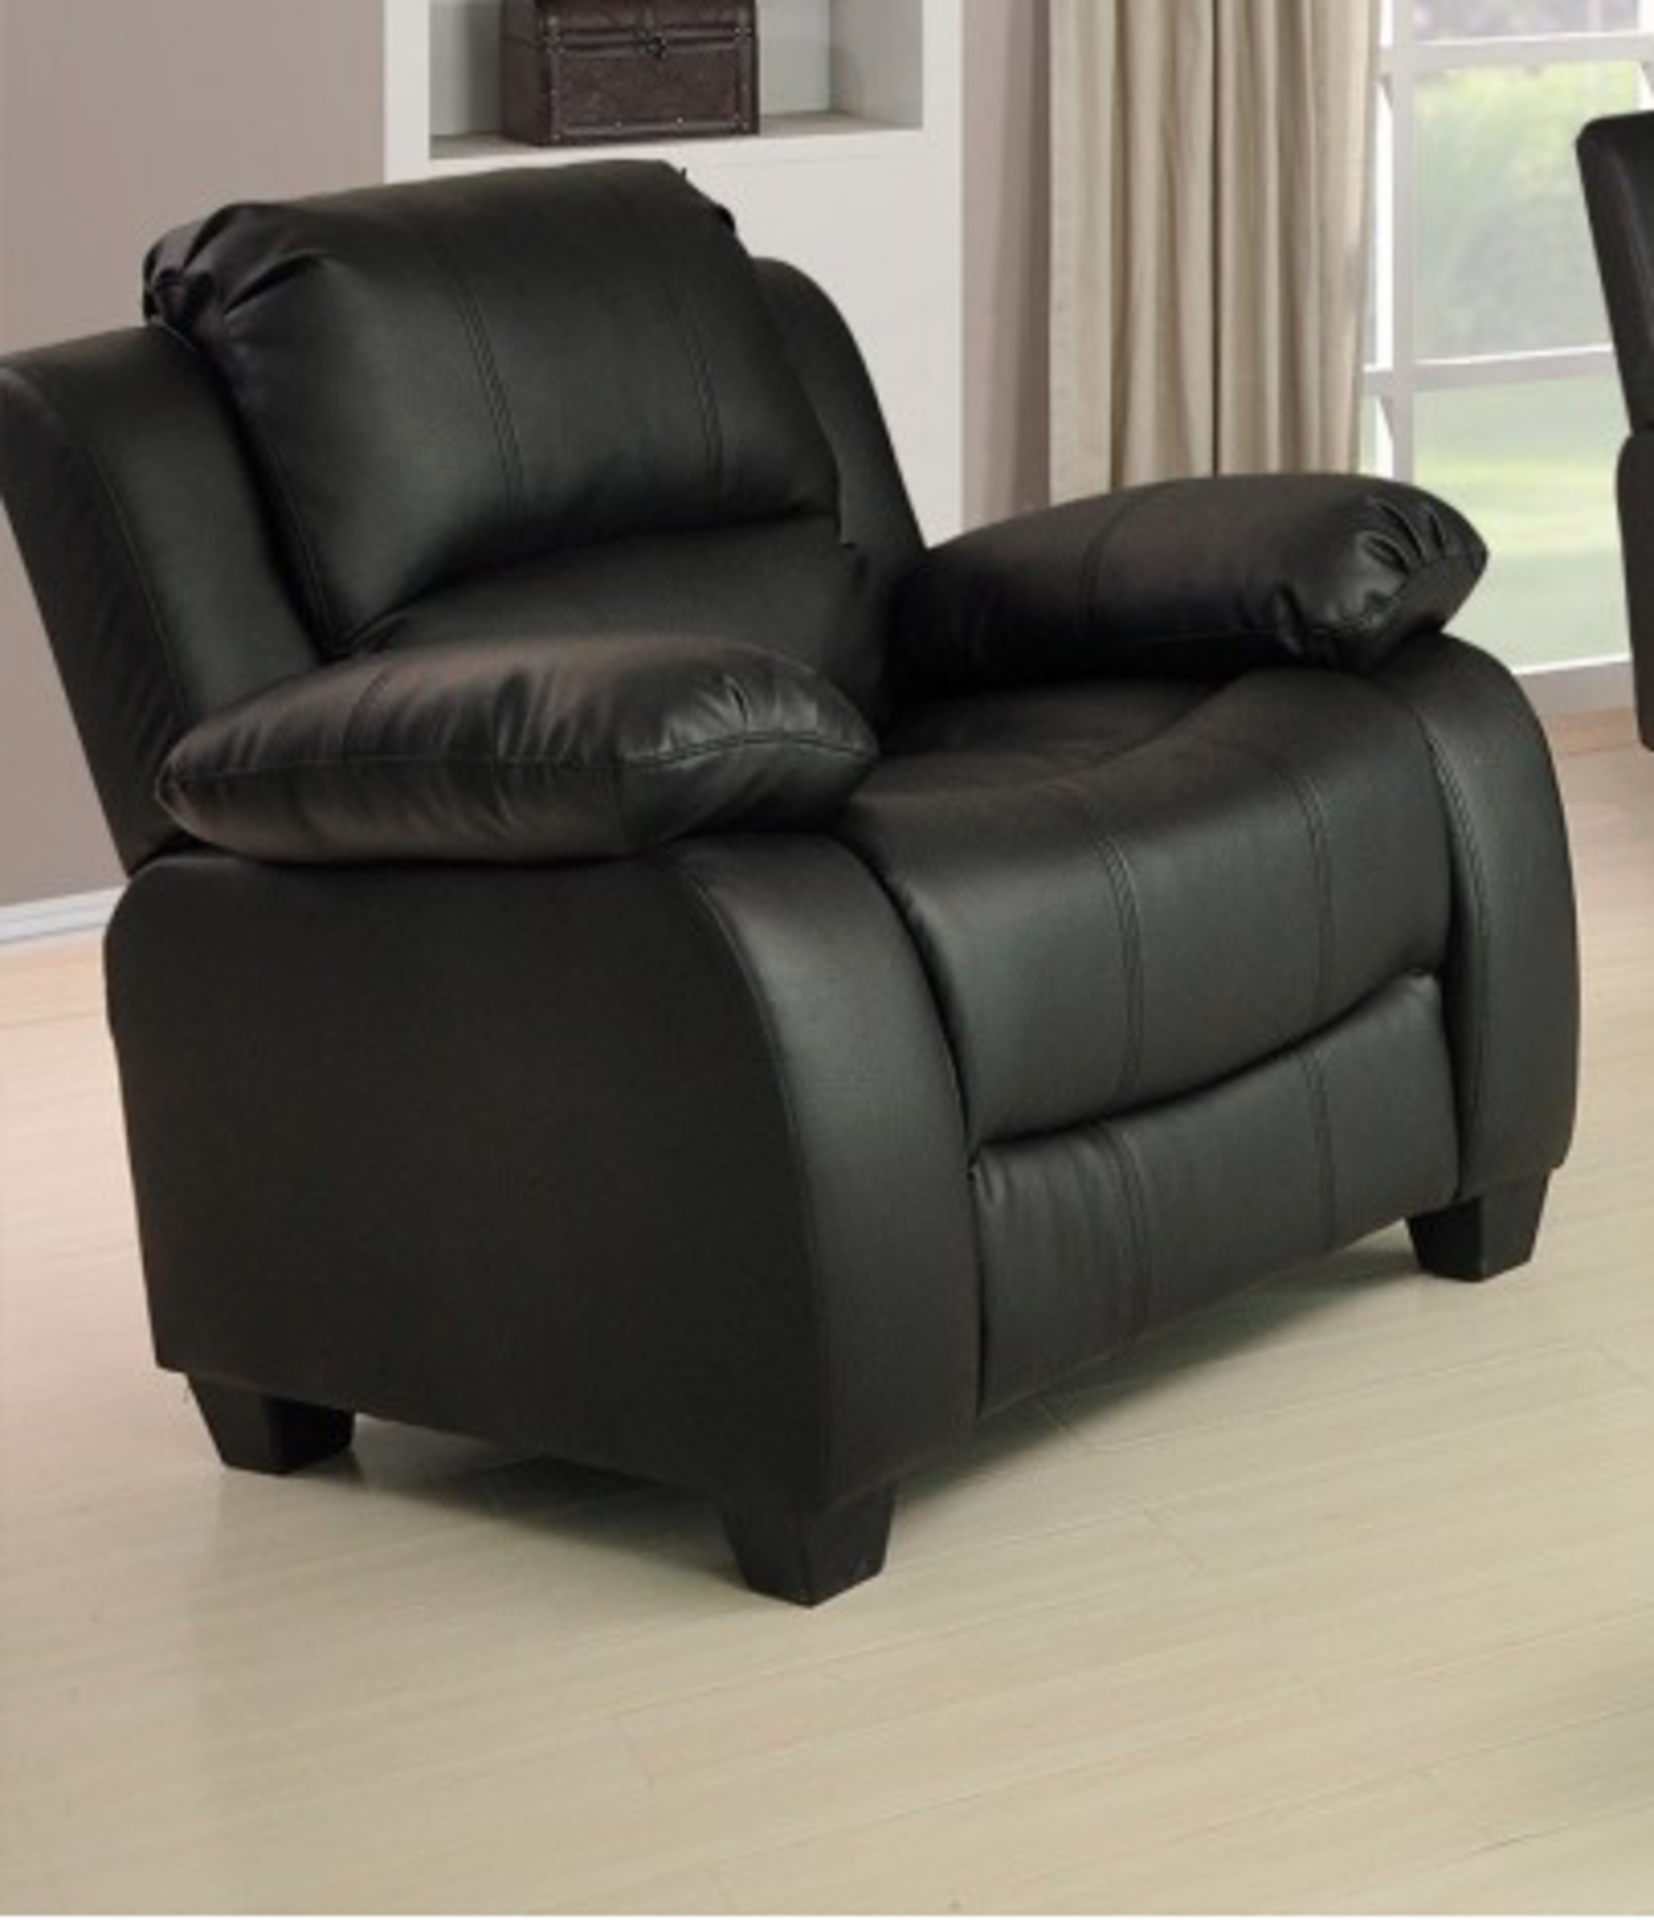 Brand new boxed direct from the manufacturers Valerie standard arm chair in black